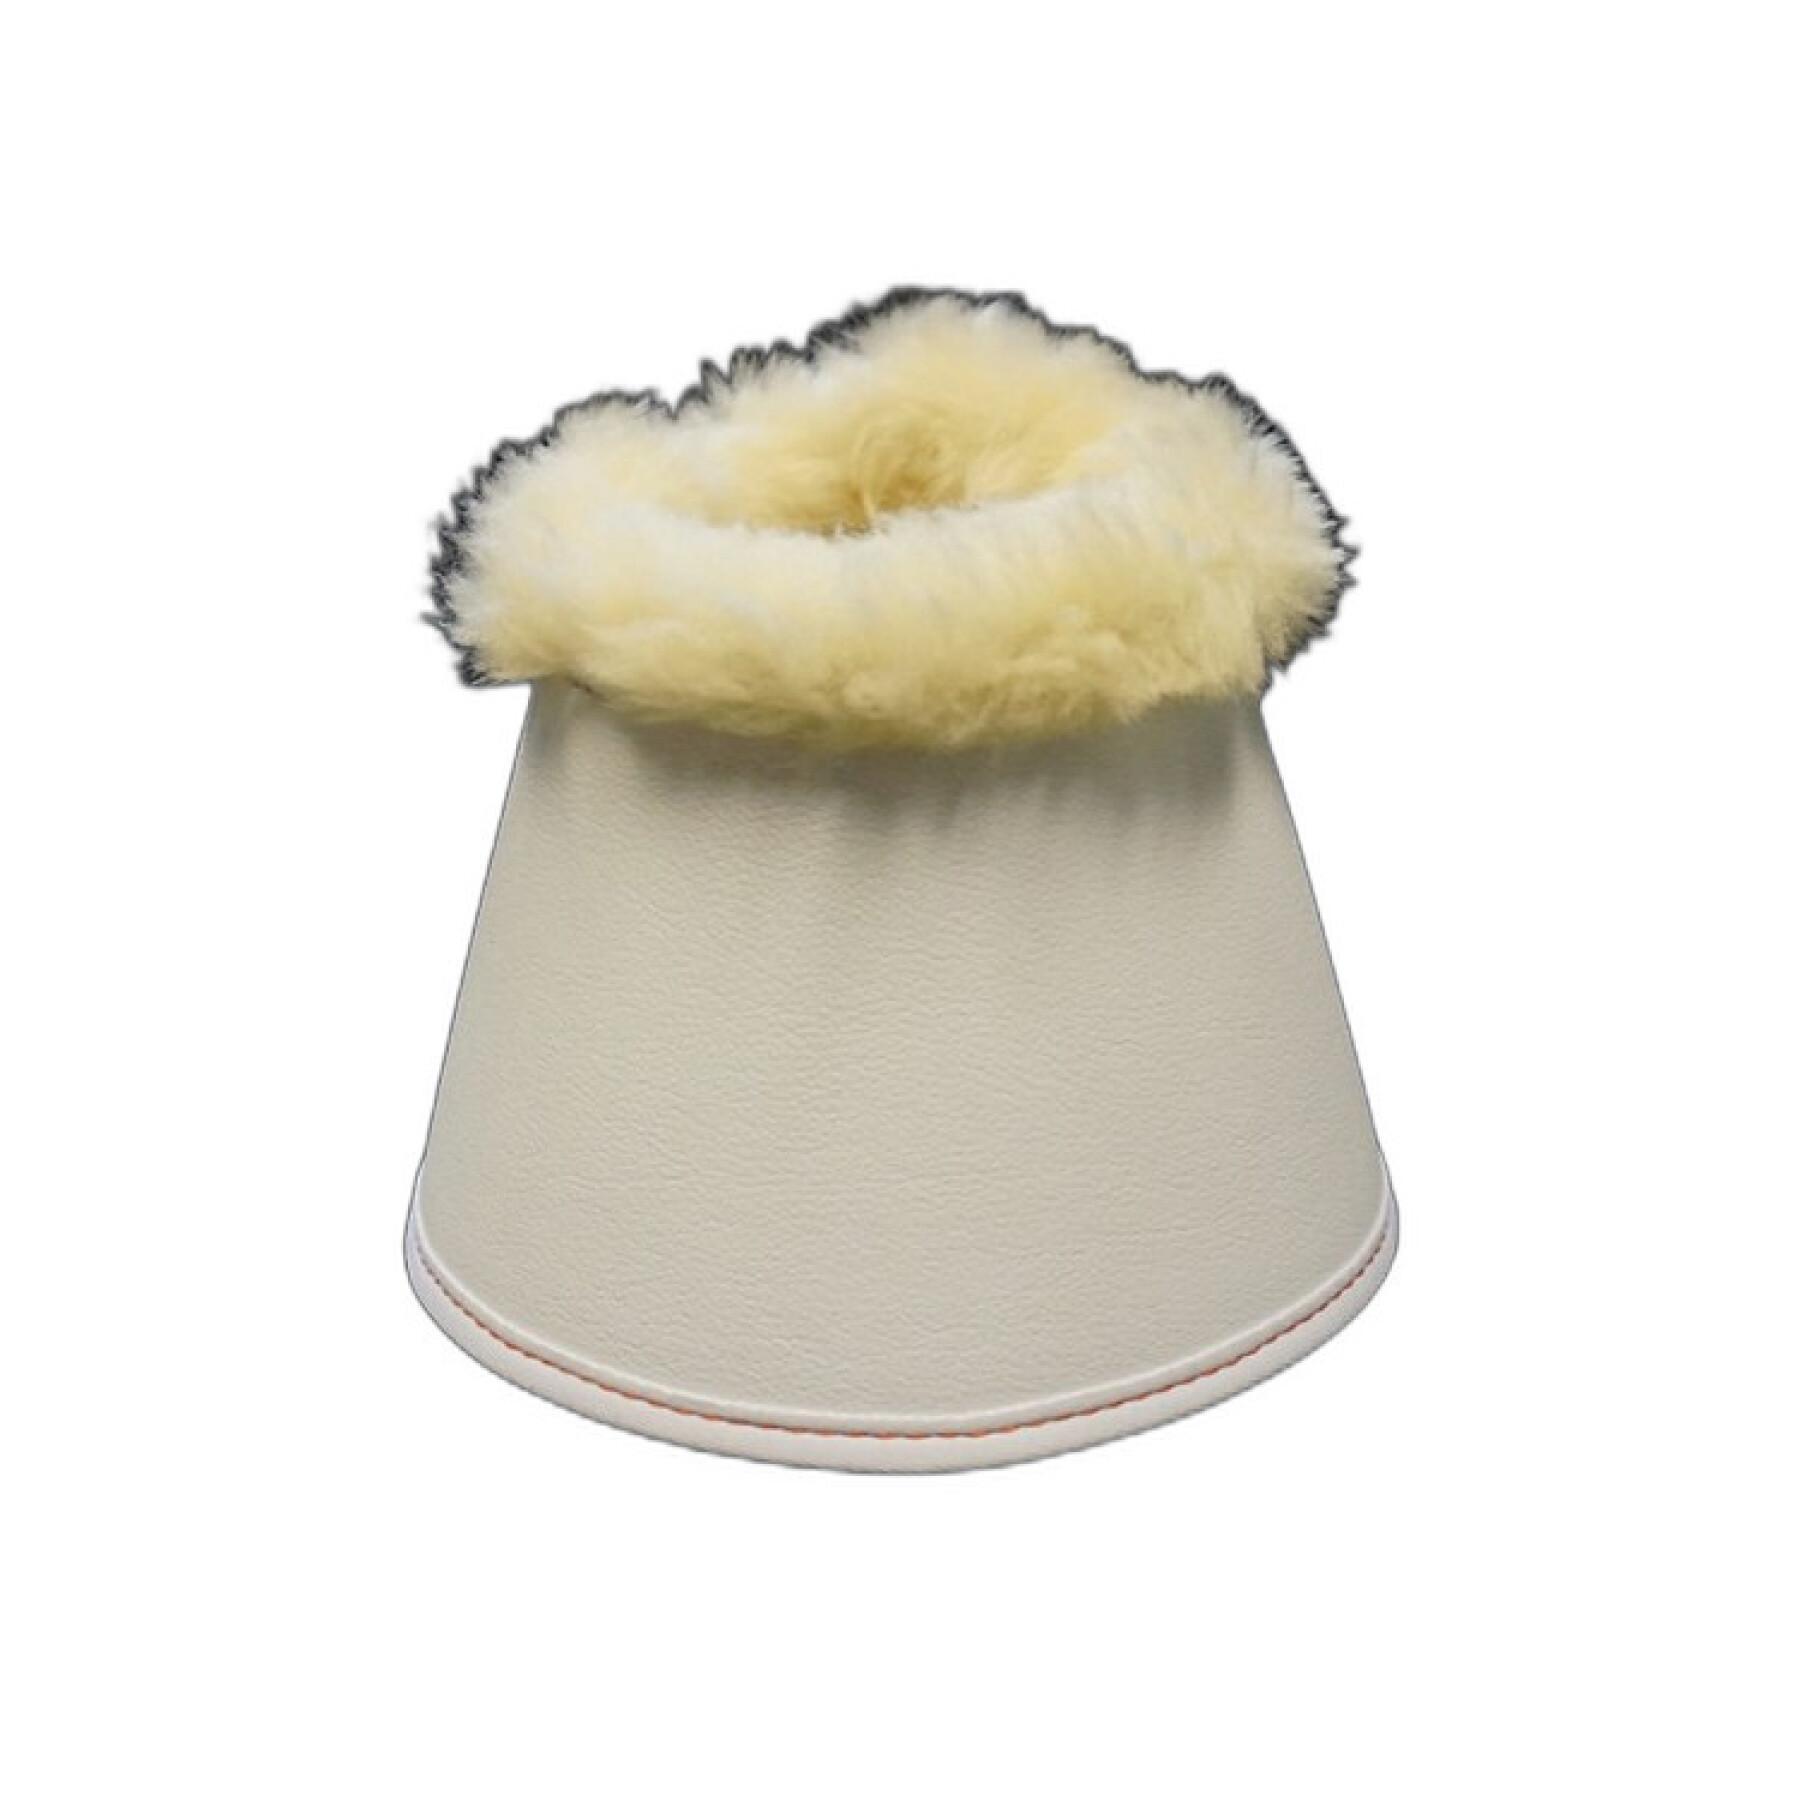 Cloches pour cheval eQuick eOverreach fluffy